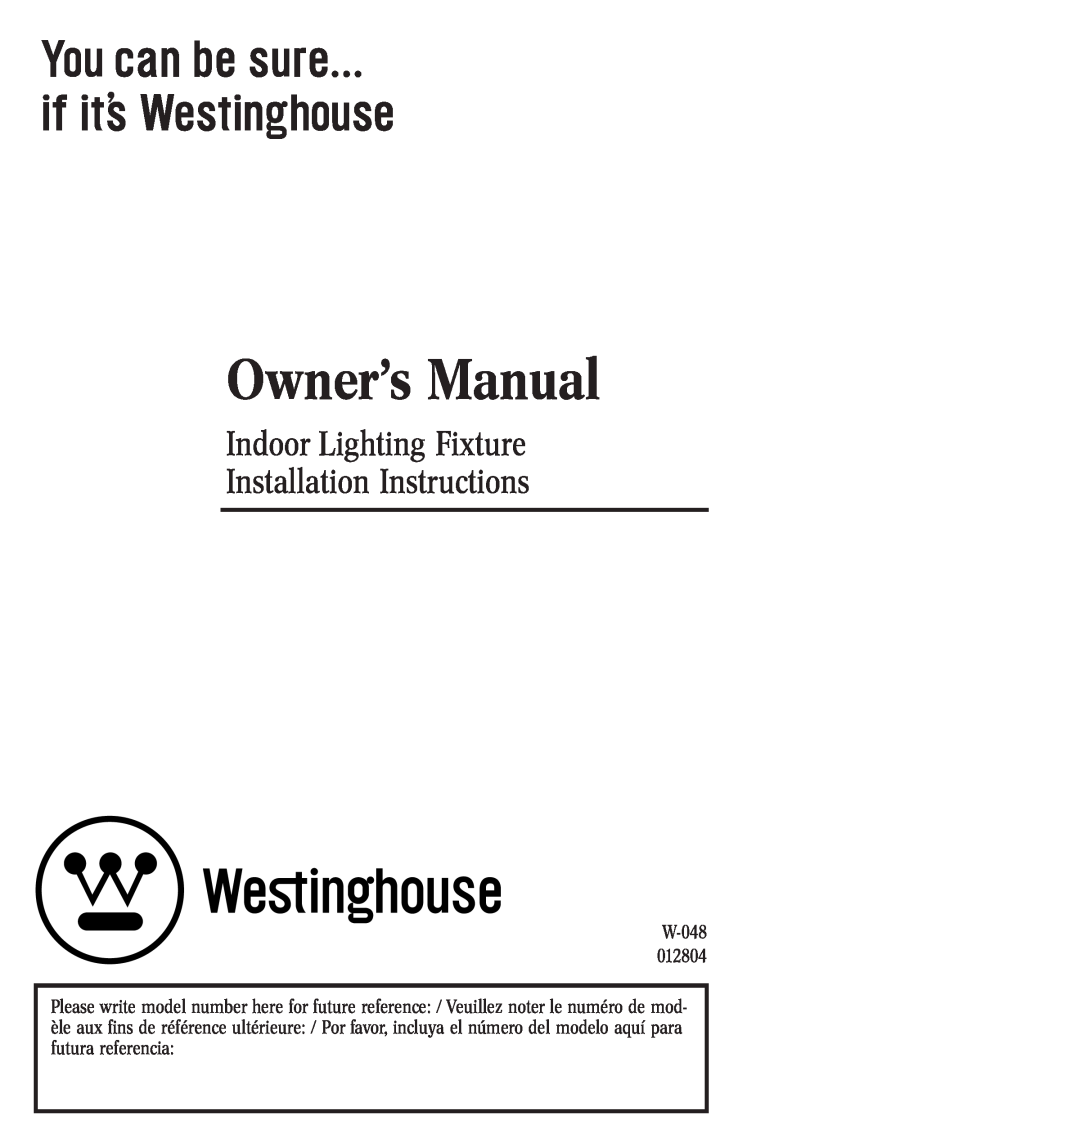 Westinghouse W-048 owner manual Indoor Lighting Fixture Installation Instructions 